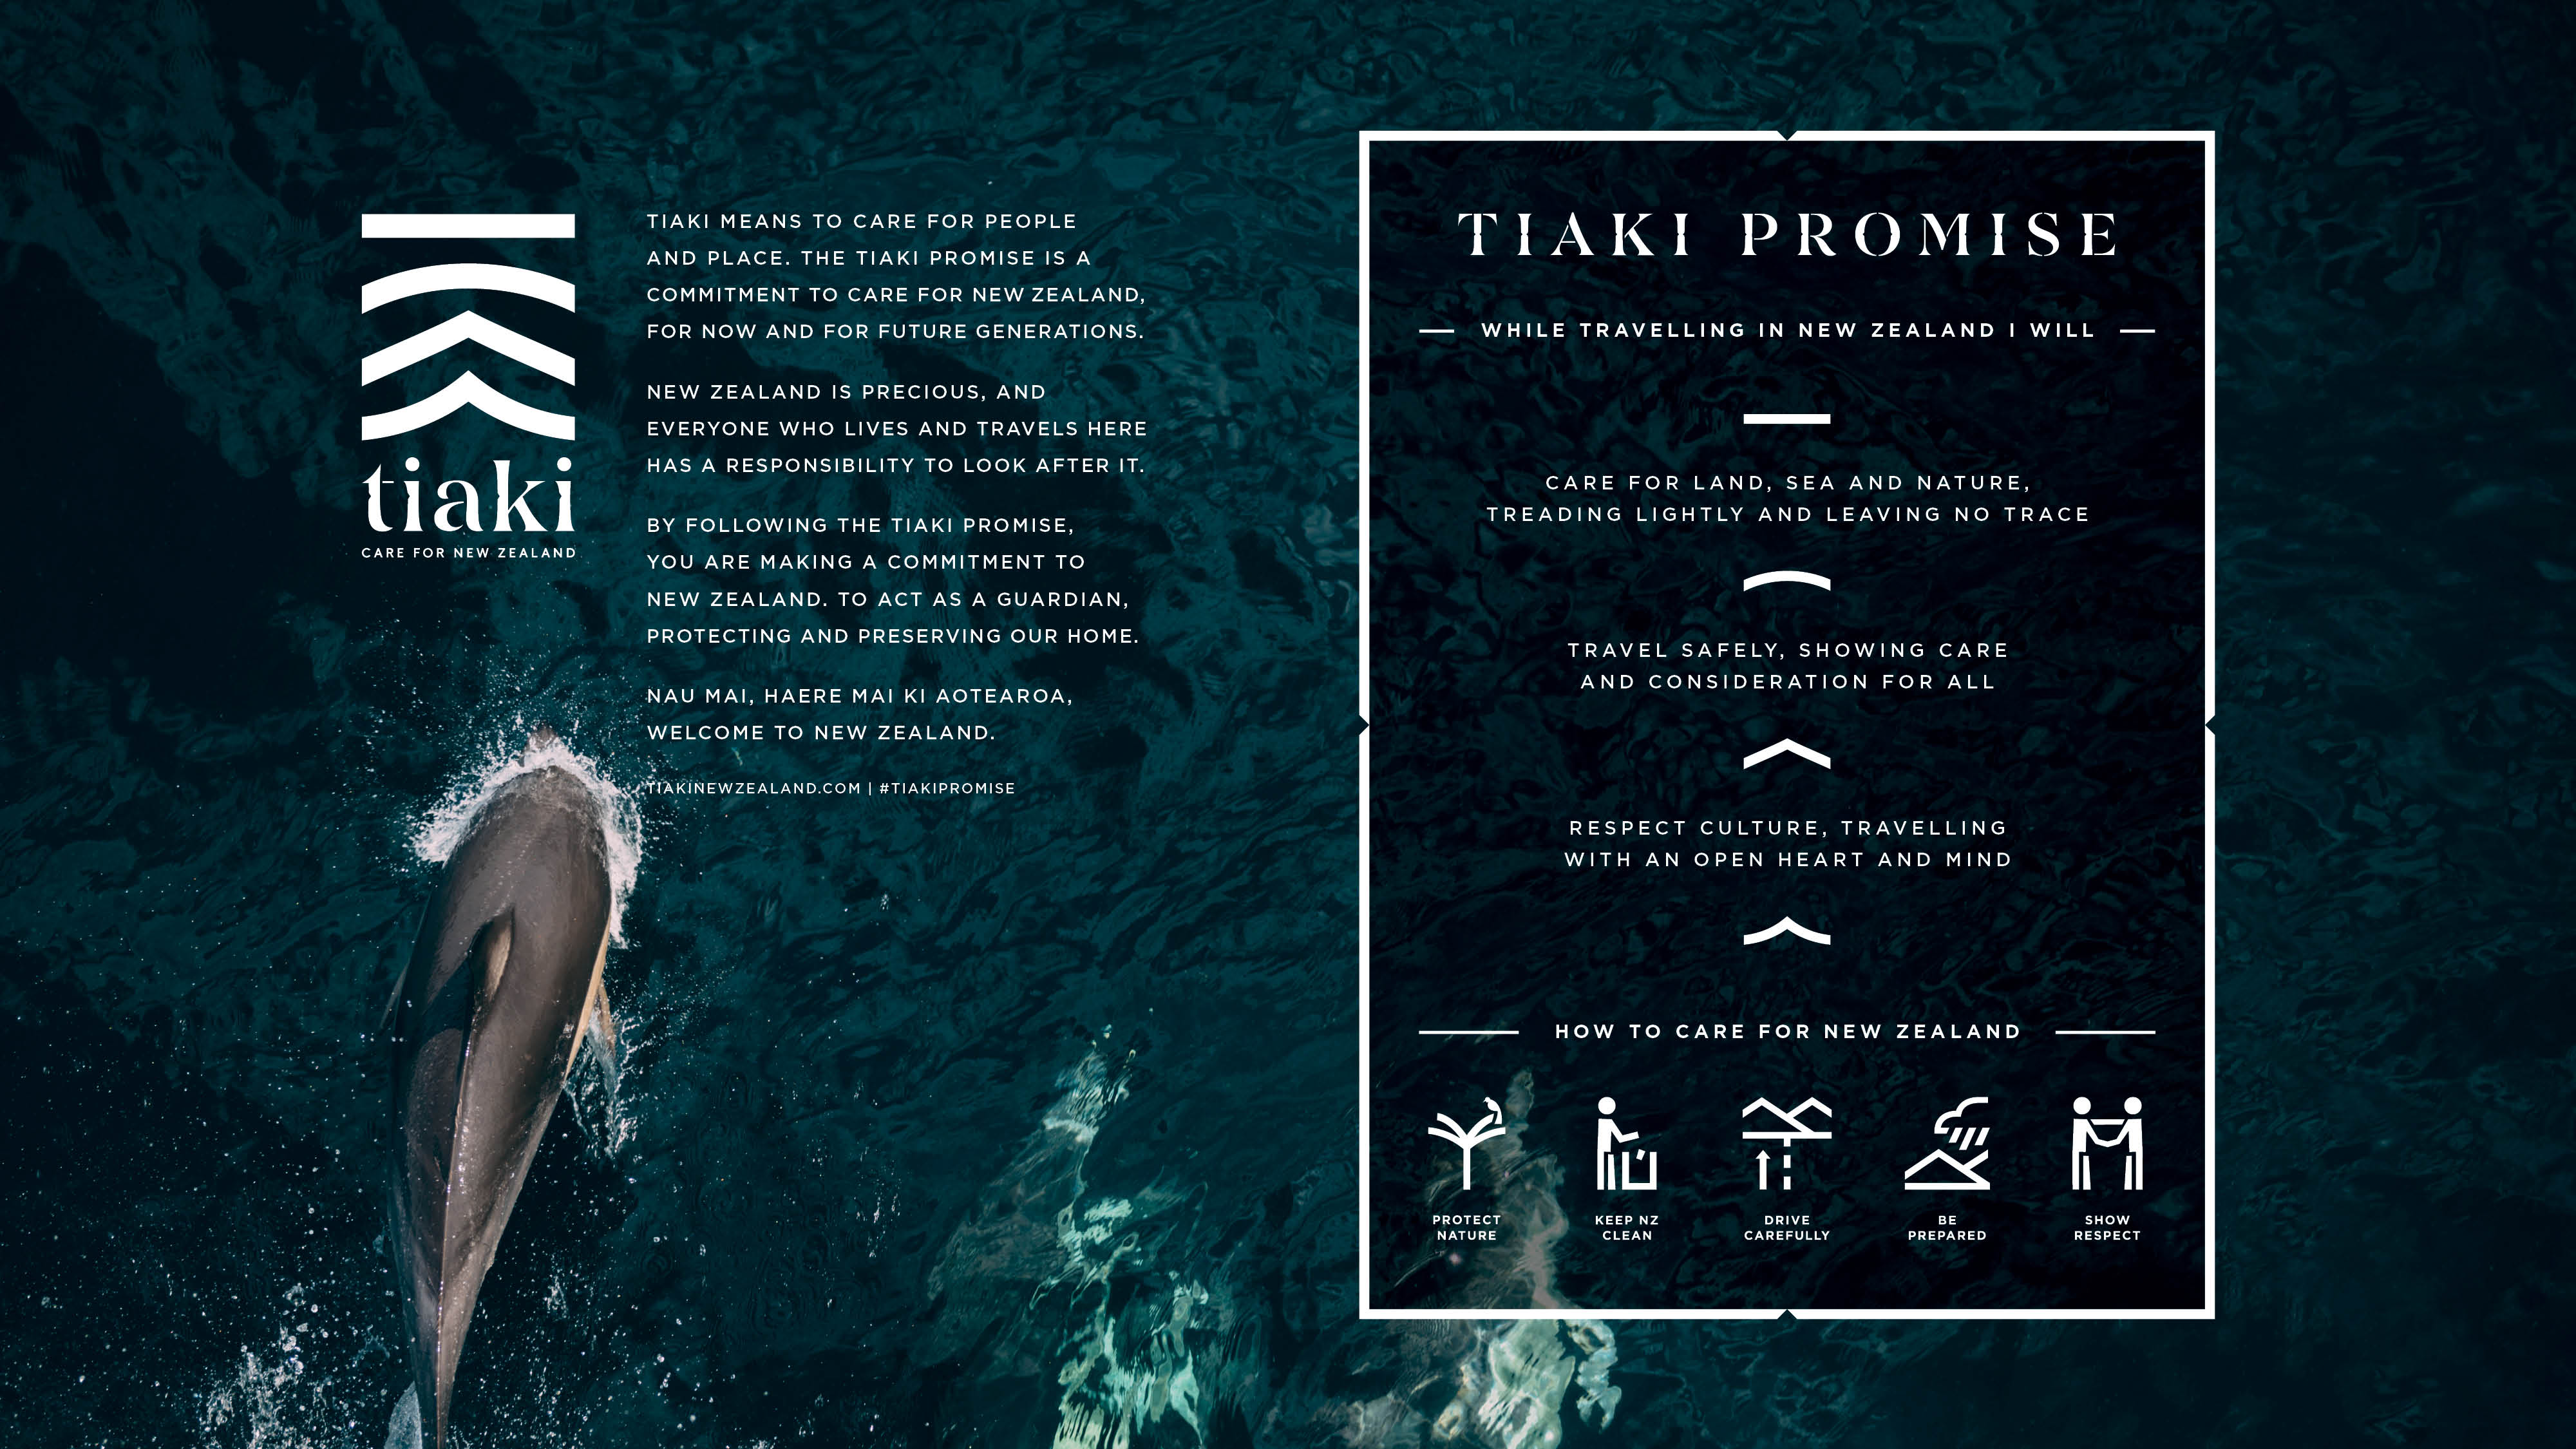 233167 tiaki information with whale imagery